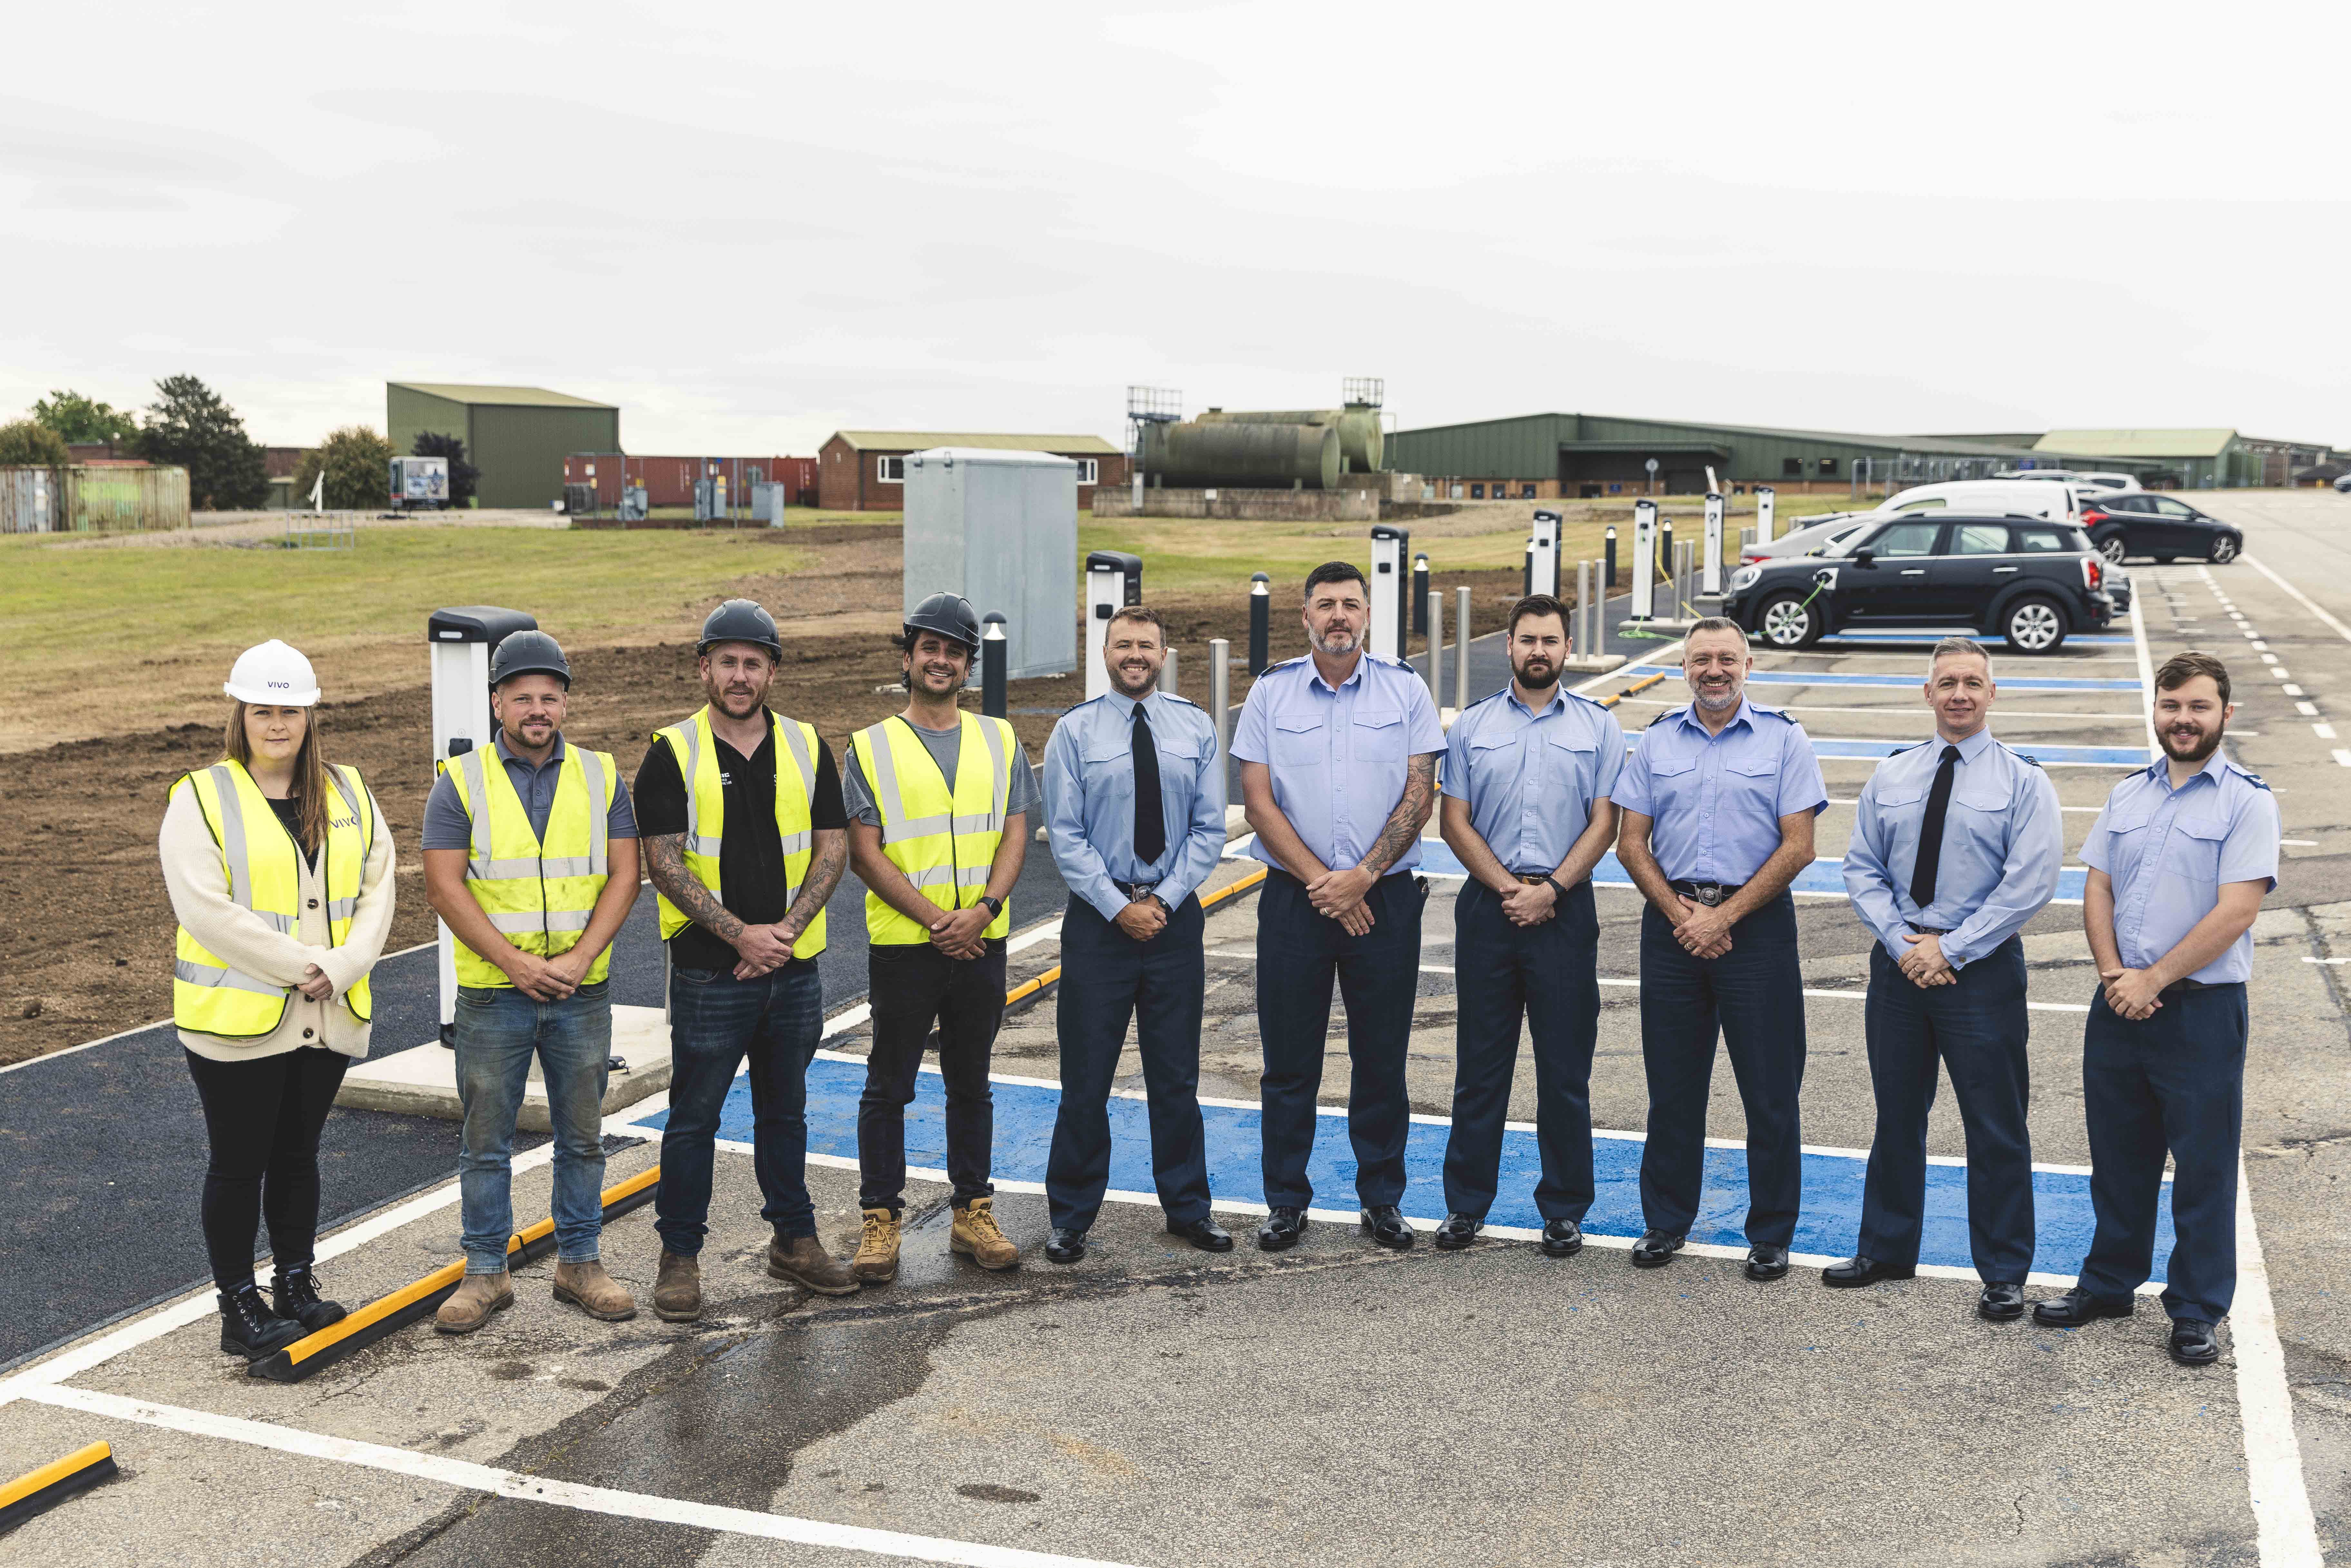 Station Whole Force Infrastructure delivery team (Station Infra, Station MT, VIVO, Anderson Green, SACX) opening the EV charging capability